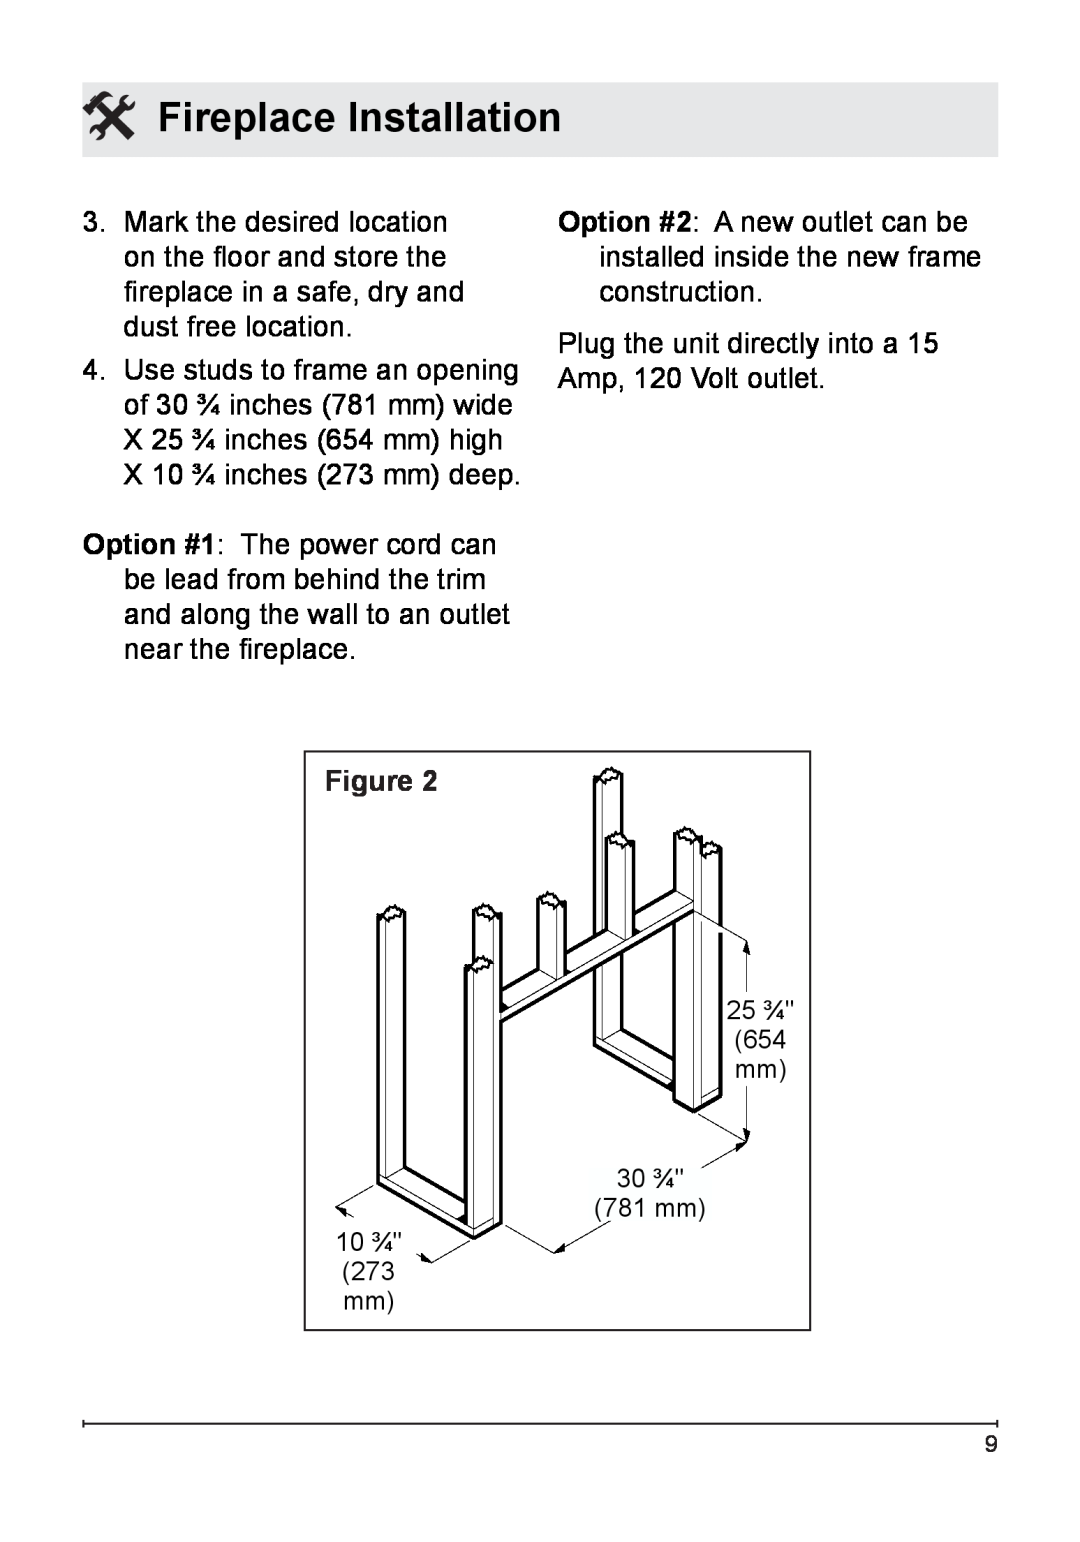 Dimplex DFB8842 owner manual Fireplace Installation, 25 ¾, 30 ¾, 10 ¾, 781 mm 